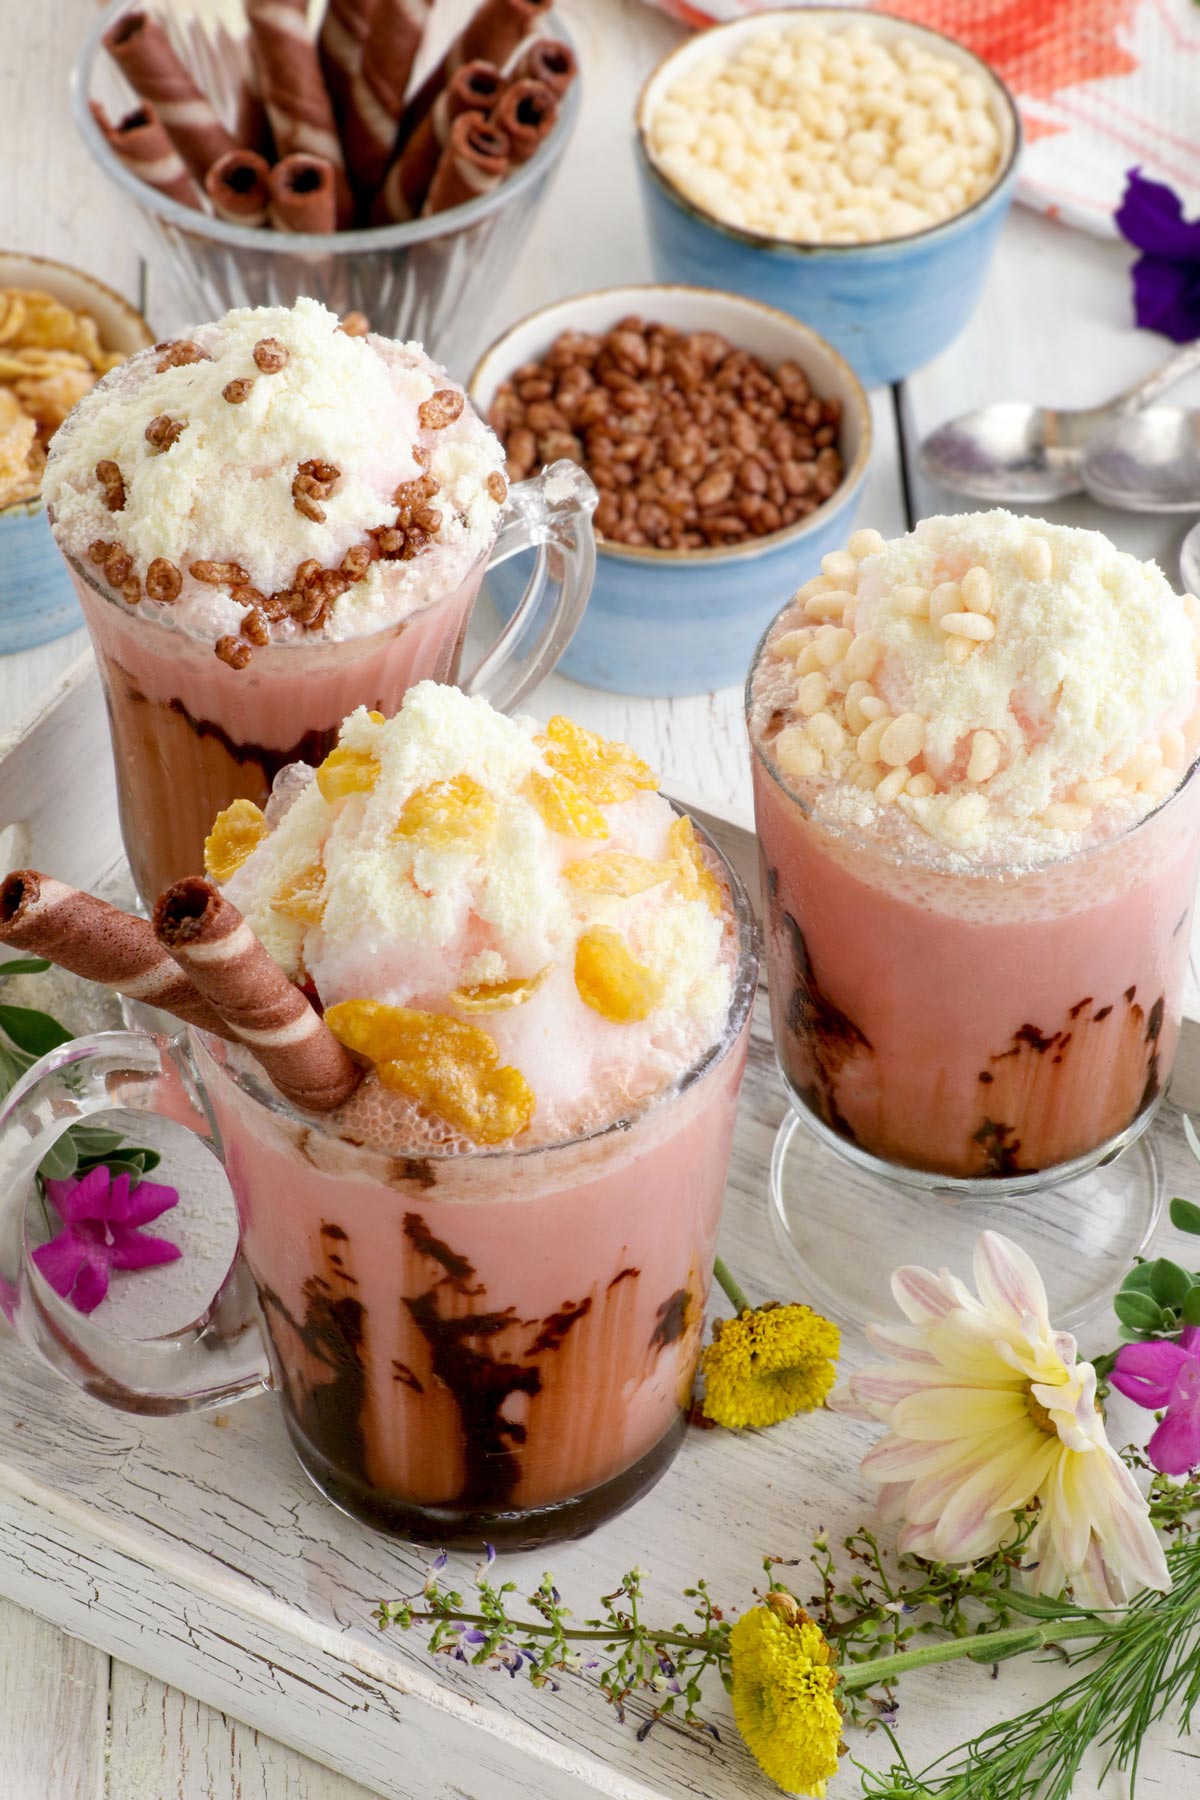 Banana-flavored and pink-hued Ice scramble in glasses with various toppings.